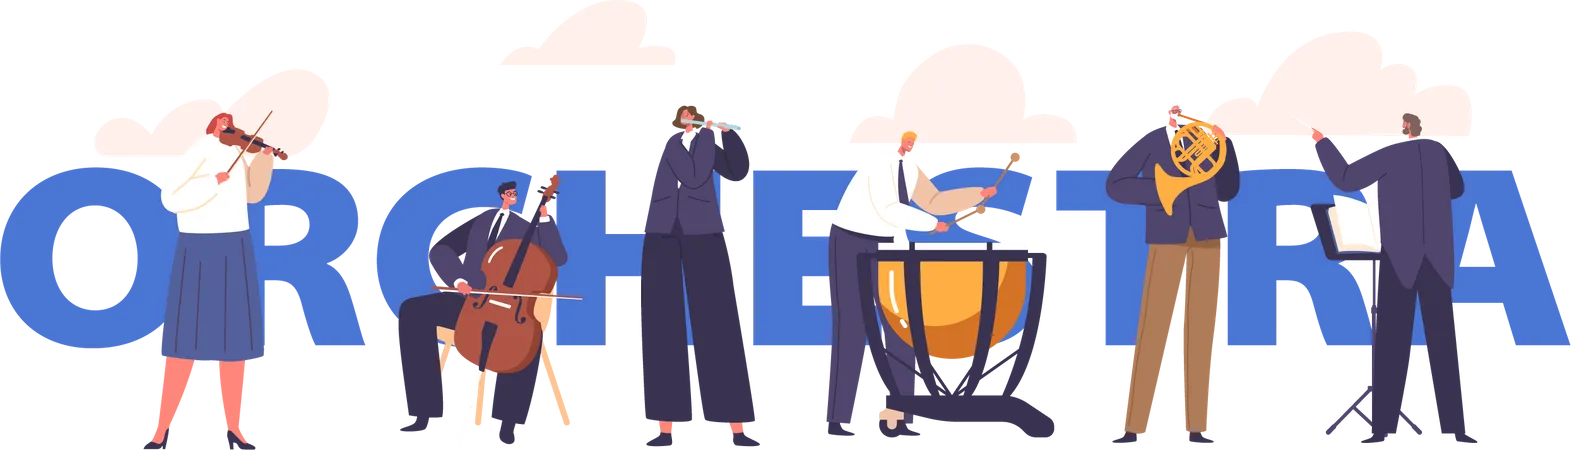 Orchestra Concept Talented Musicians Perform Classical Masterpieces On Stage With Conductor Artists Skillfully Playing Classical Music Poster Banner Or Flyer Cartoon People Vector Illustration Illustration